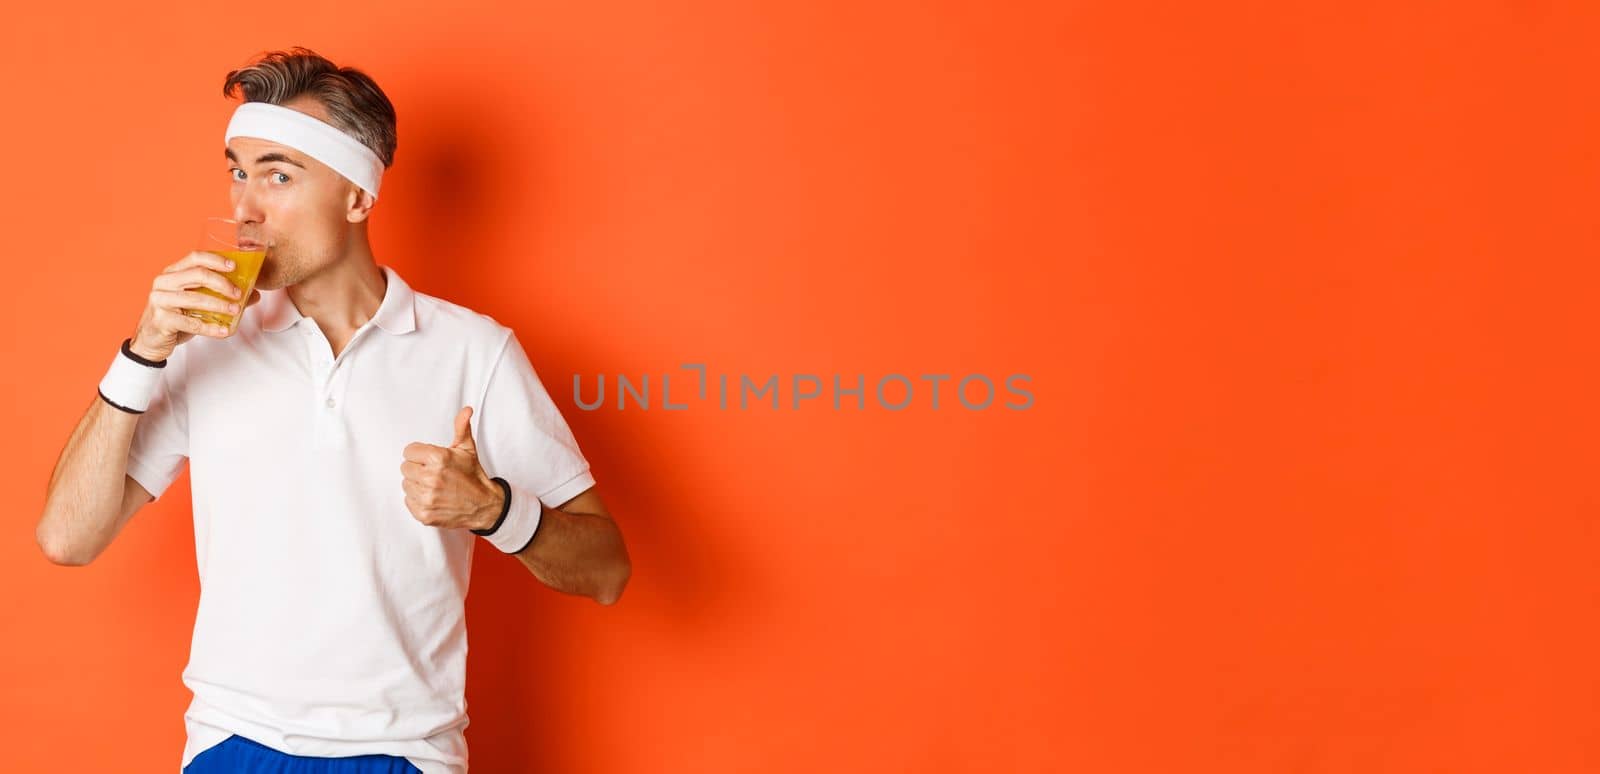 Concept of workout, gym and lifestyle. Portrait of handsome middle-aged fitness guy, showing thumbs-up and drinking juice, standing over orange background.